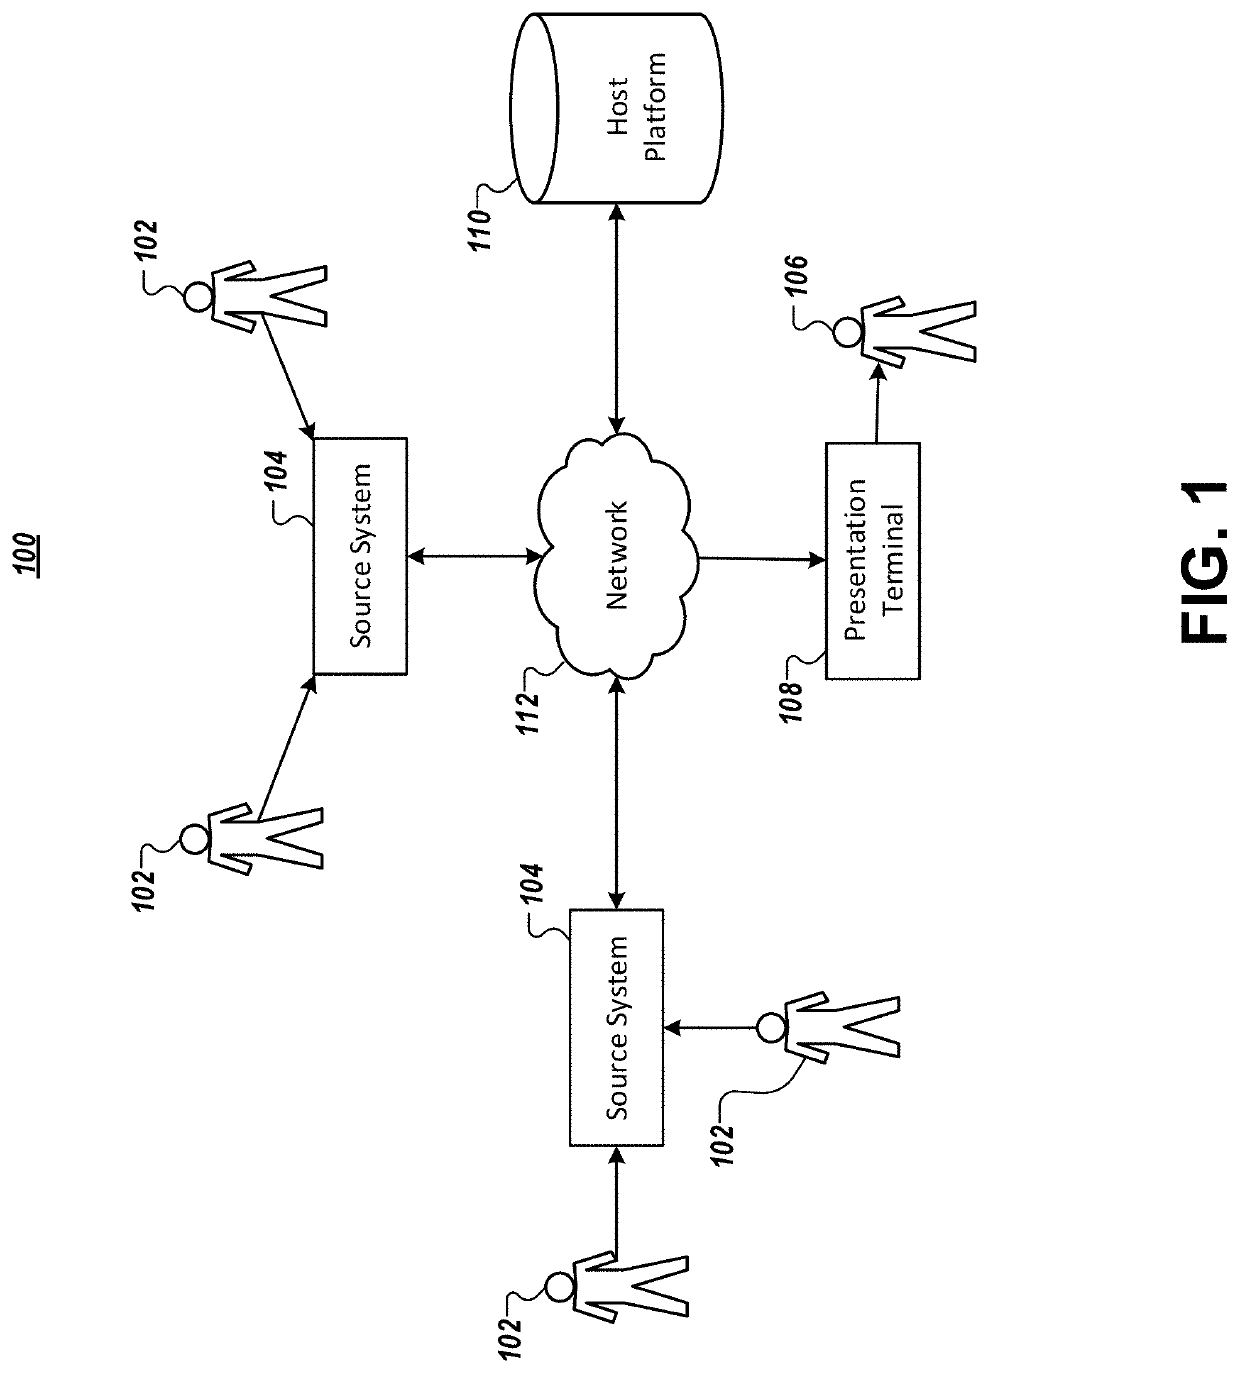 Methods and apparatuses for improved data modeling using a relational database management system